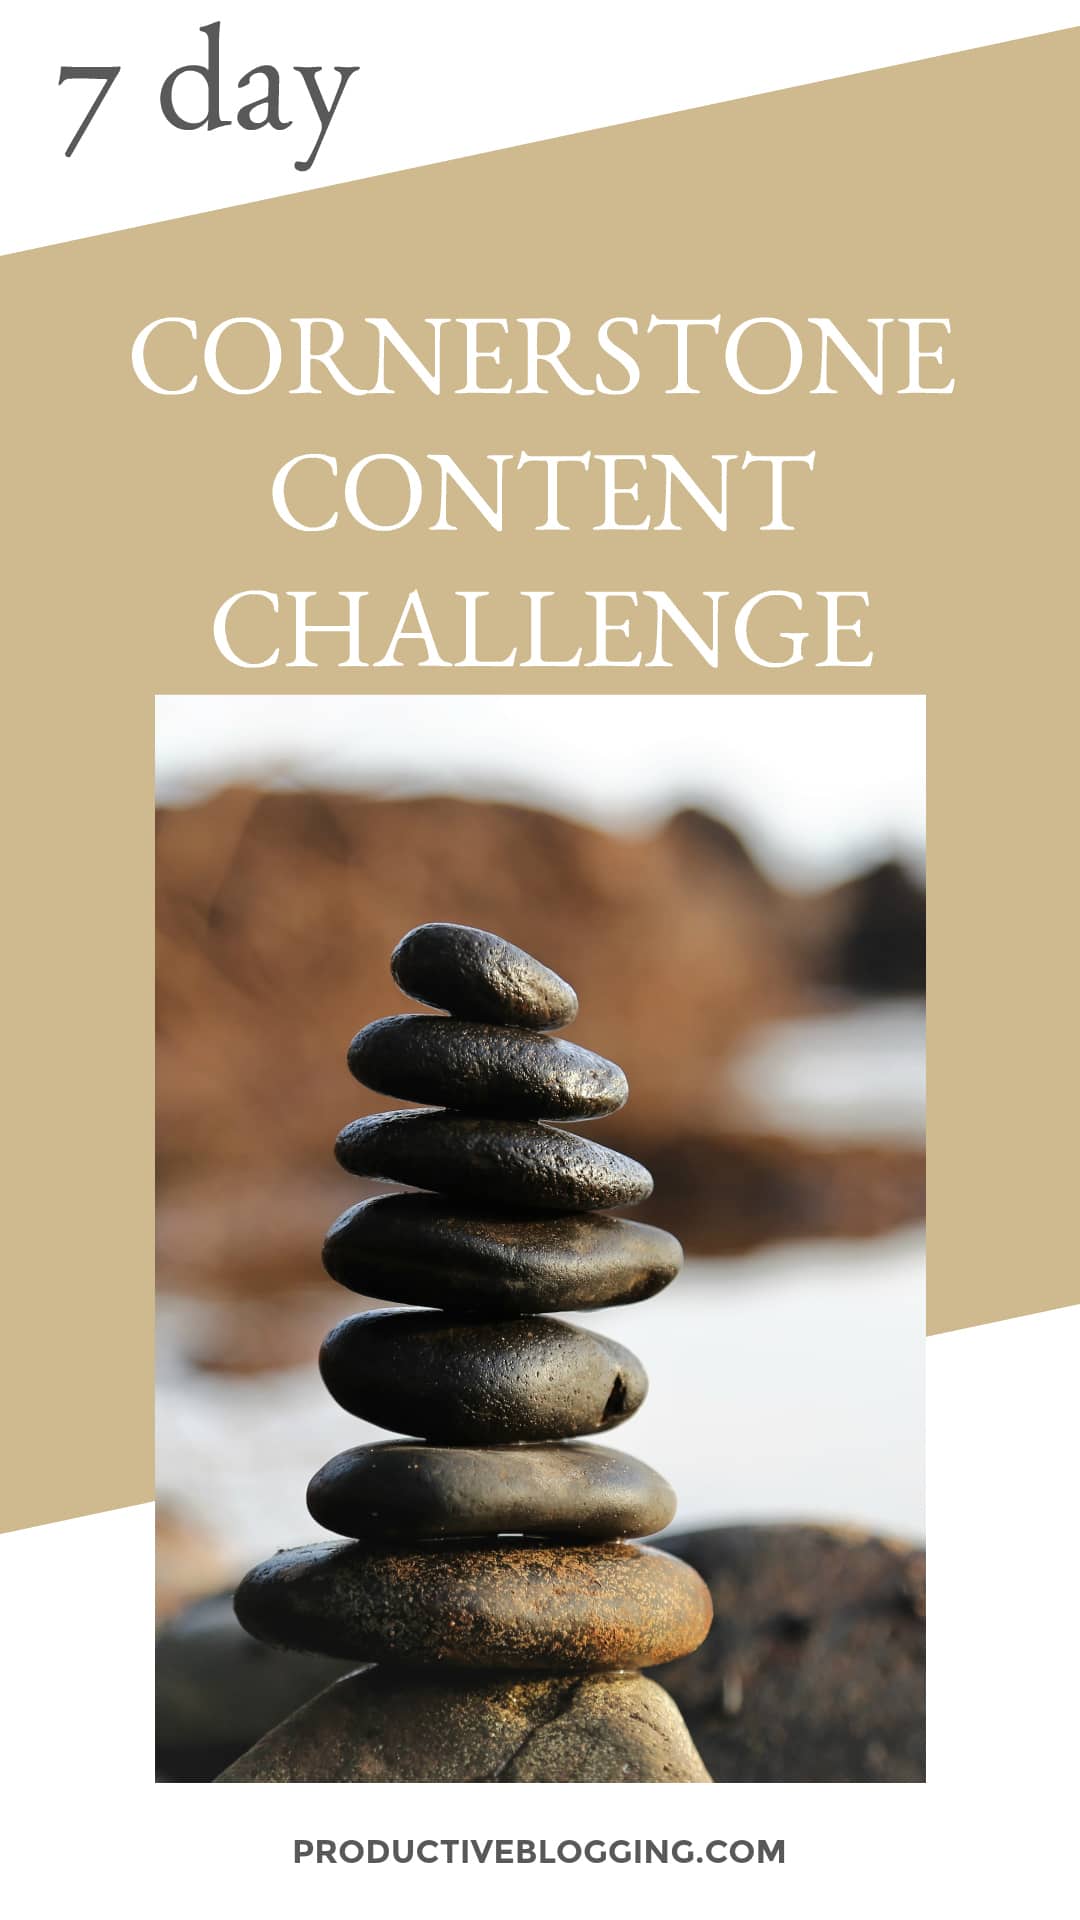 Then why not take my 7 day Cornerstone Content Challenge? 7 days to create one piece of killer cornerstone content and create a solid plan for the next steps… #freechallenge #freecourse #cornerstonecontent #cornerstonecontentchallenge #SEO #YoastSEO #bloggrowthhacks #productiveblogging